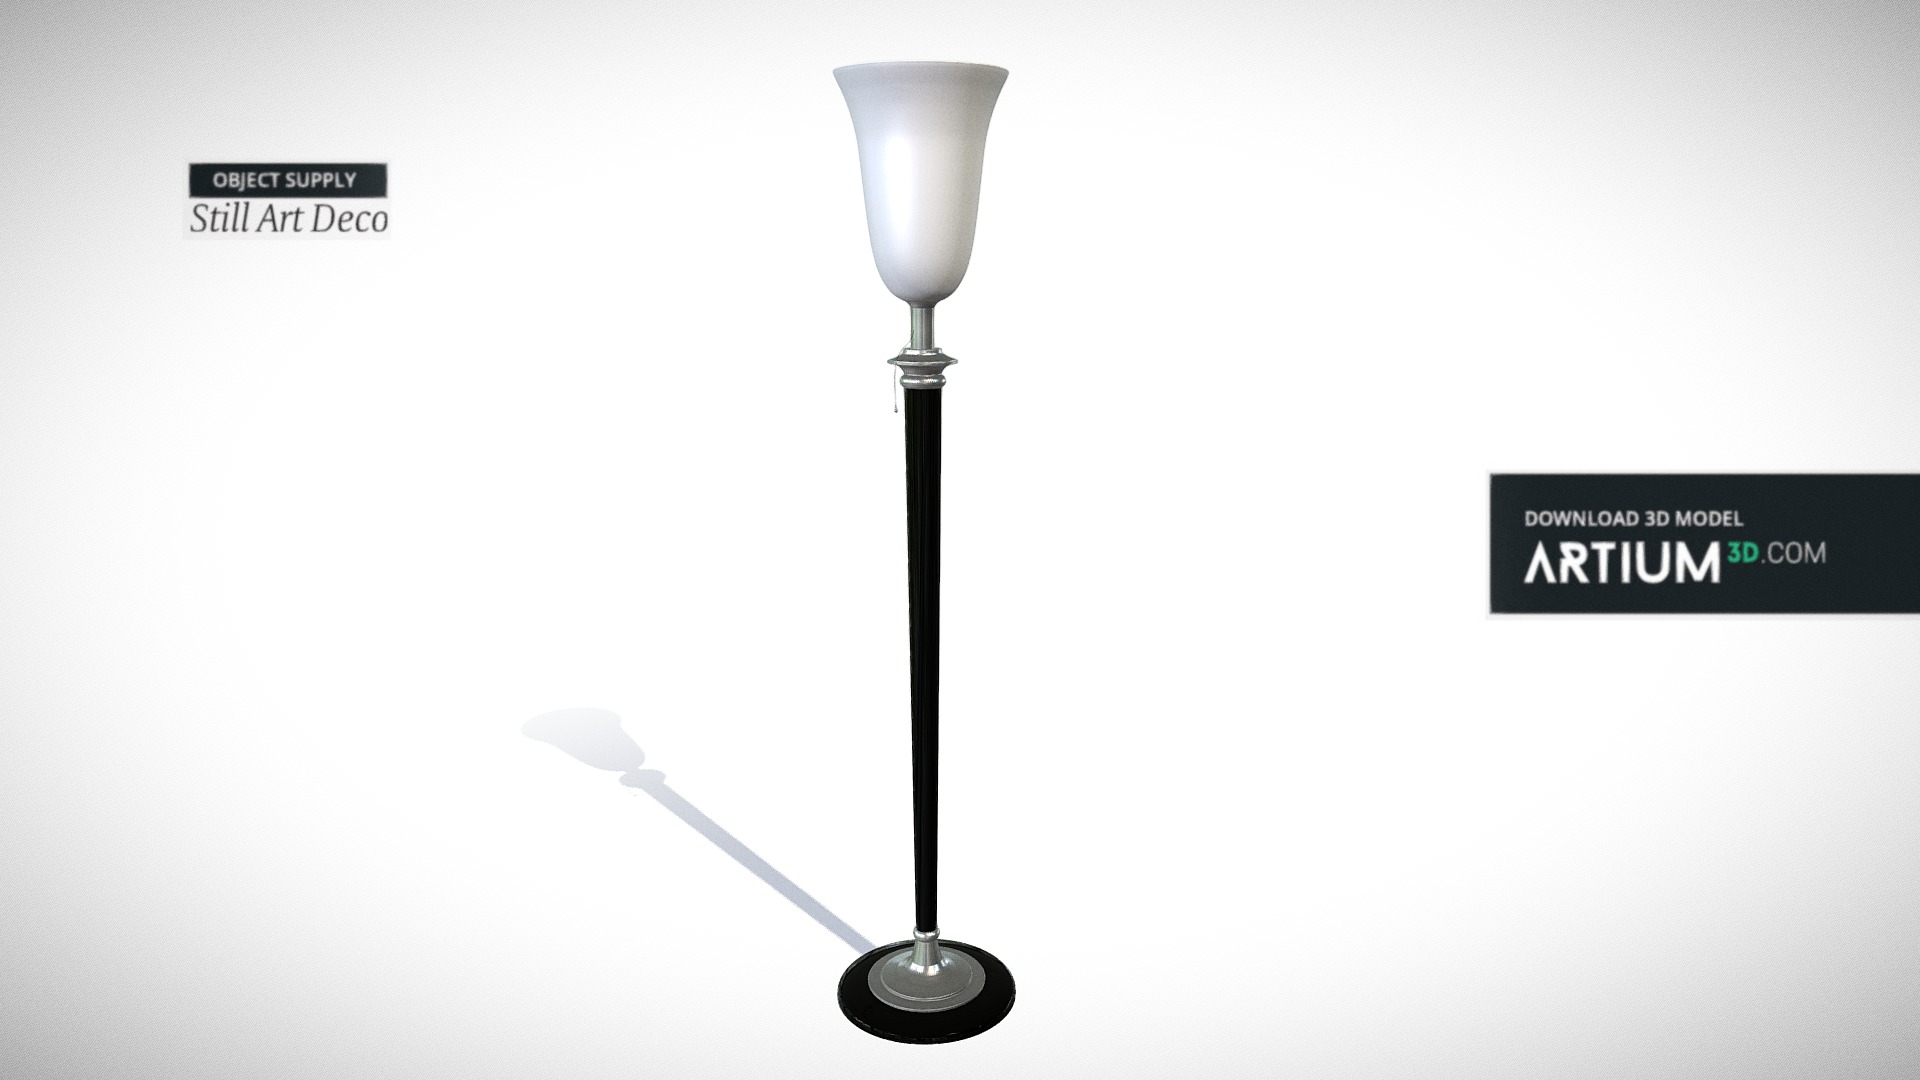 3D model Stand lamp ,,Mazda“ – Art Deco style - This is a 3D model of the Stand lamp ,,Mazda“ – Art Deco style. The 3D model is about a lamp with a shade.